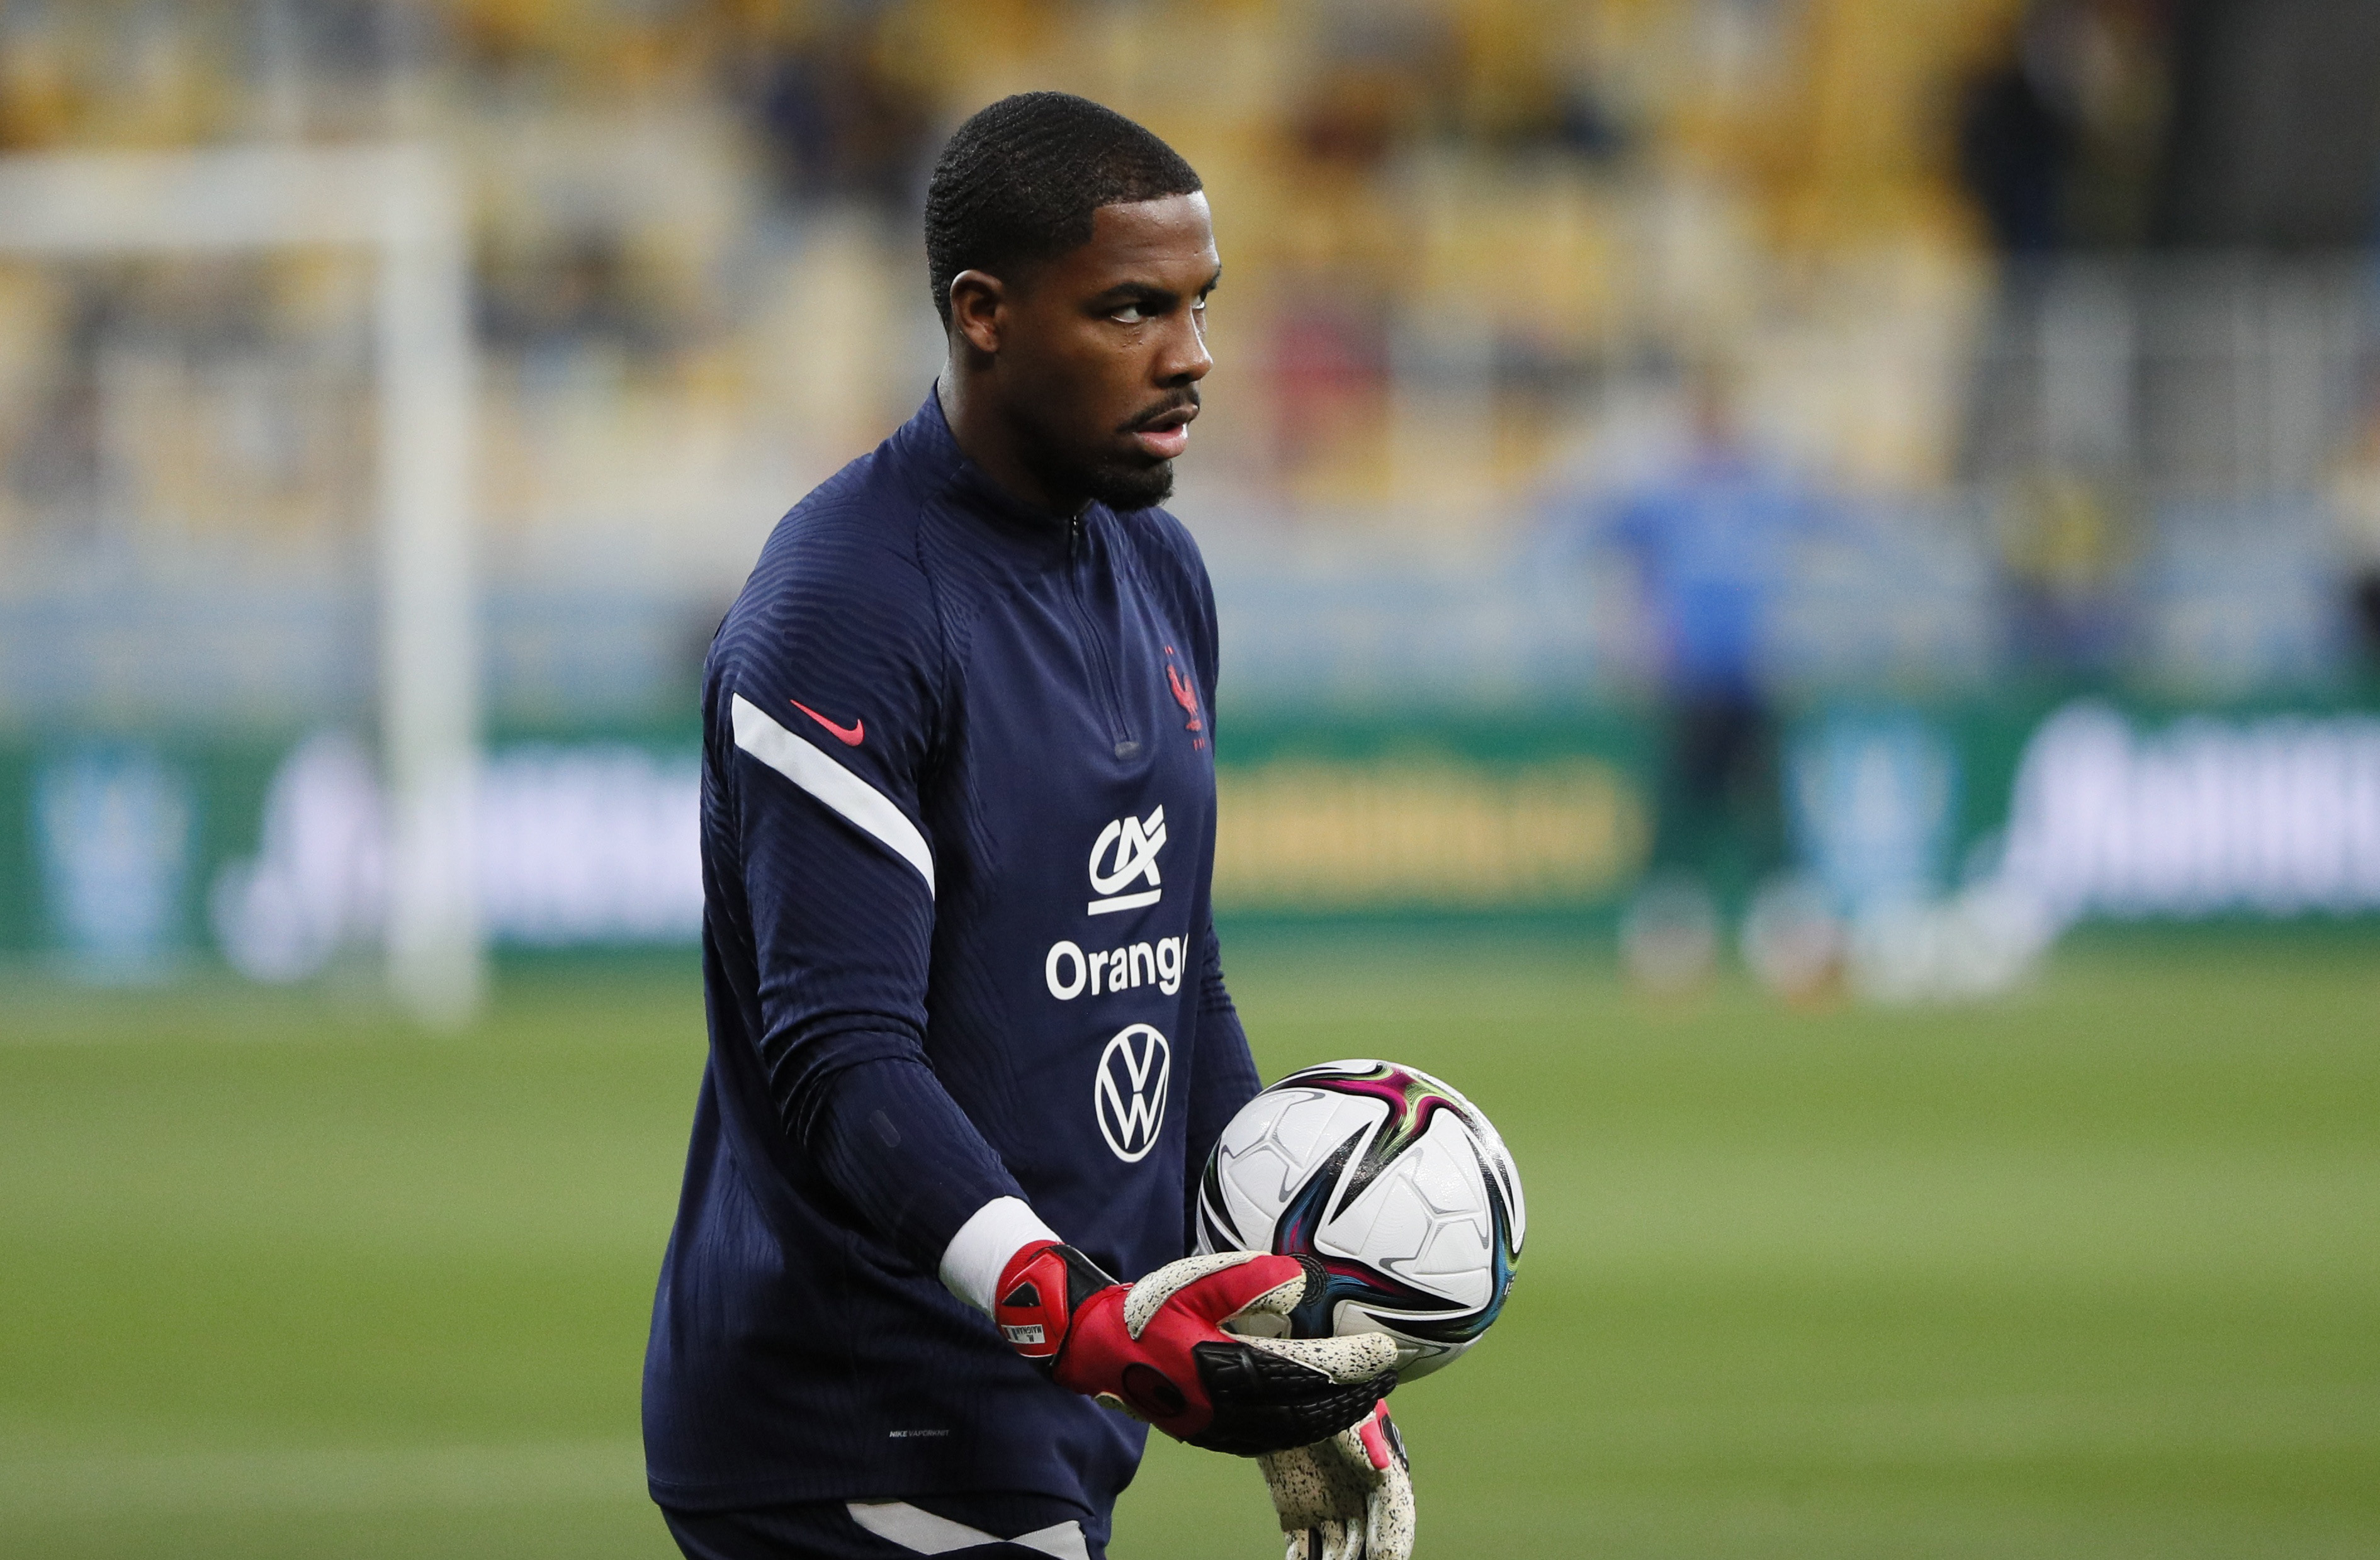 Maignan to be France's number one keeper, captain not named yet